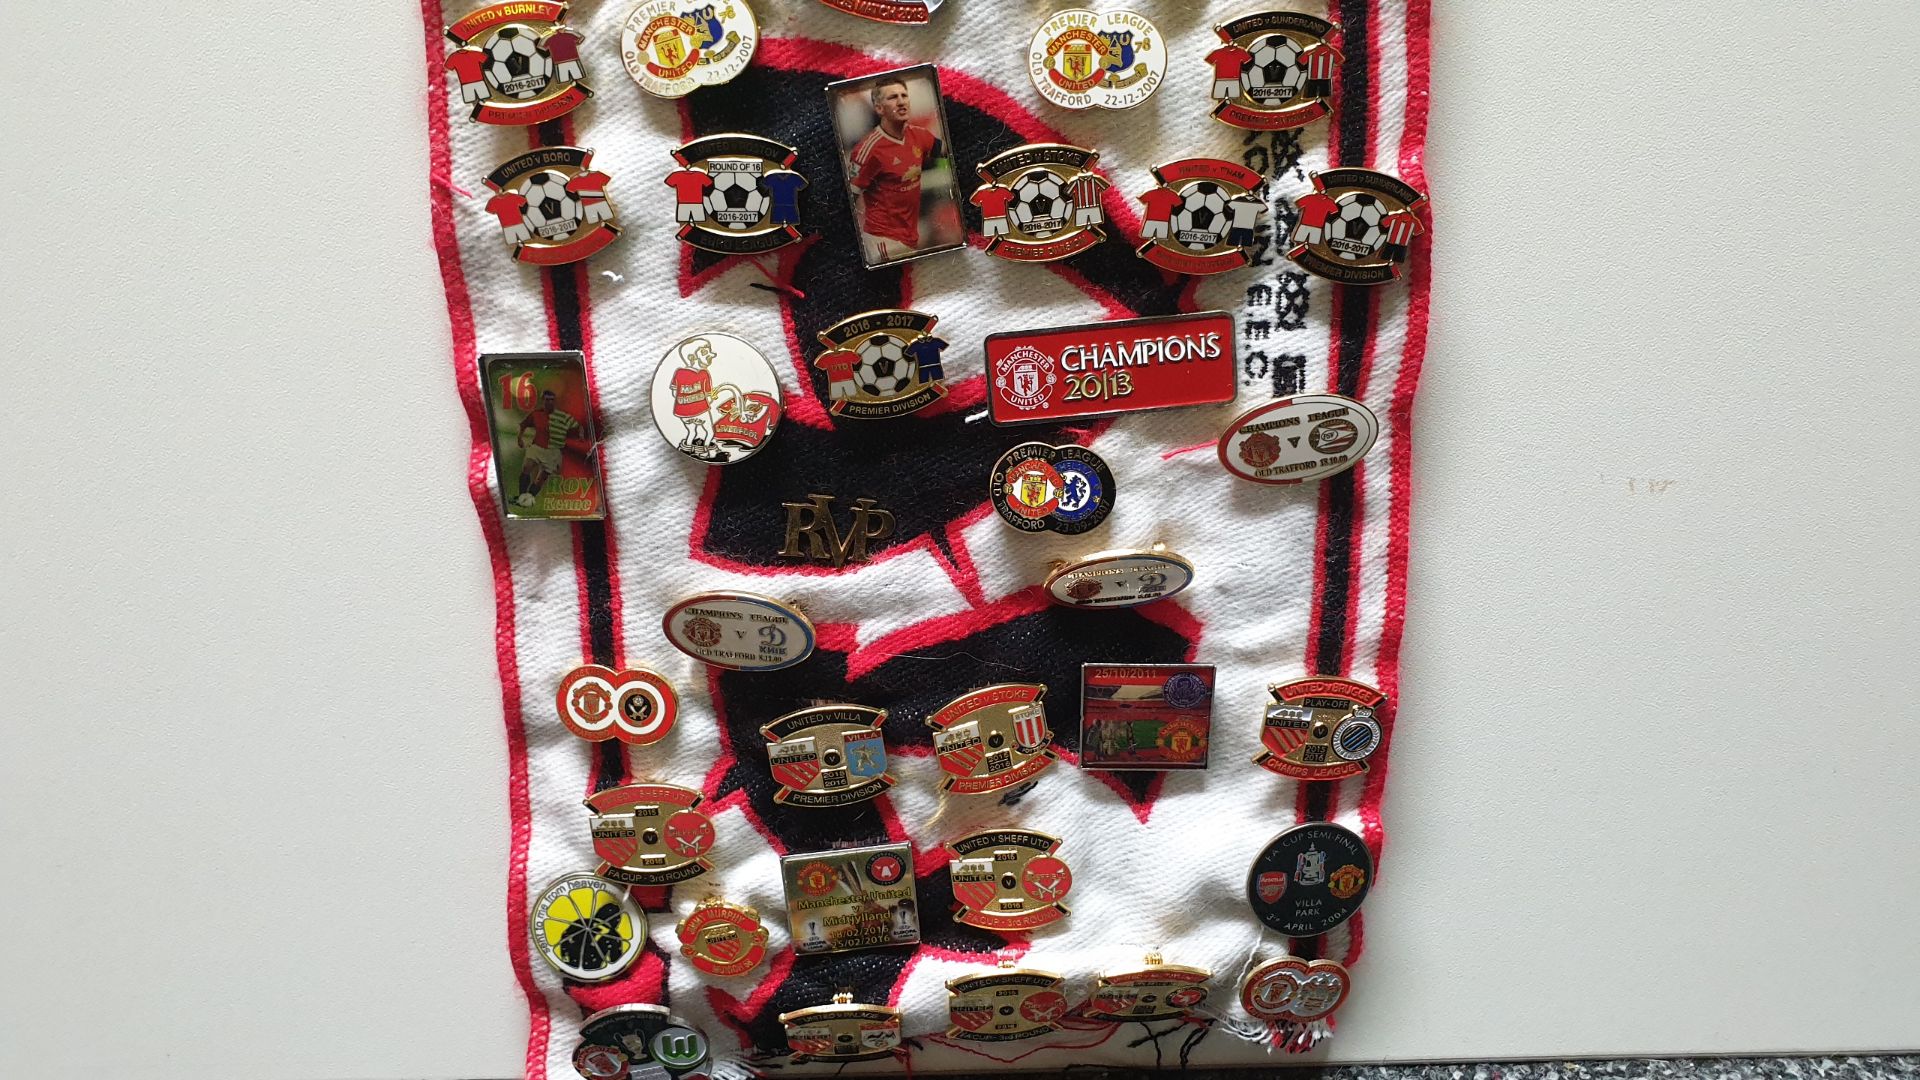 MANCHESTER UNITED SCARF CONTAINING APPROX 230 X PIN BADGES IE GEORGE BEST/STONE ROSES SENT TO ME - Image 8 of 8